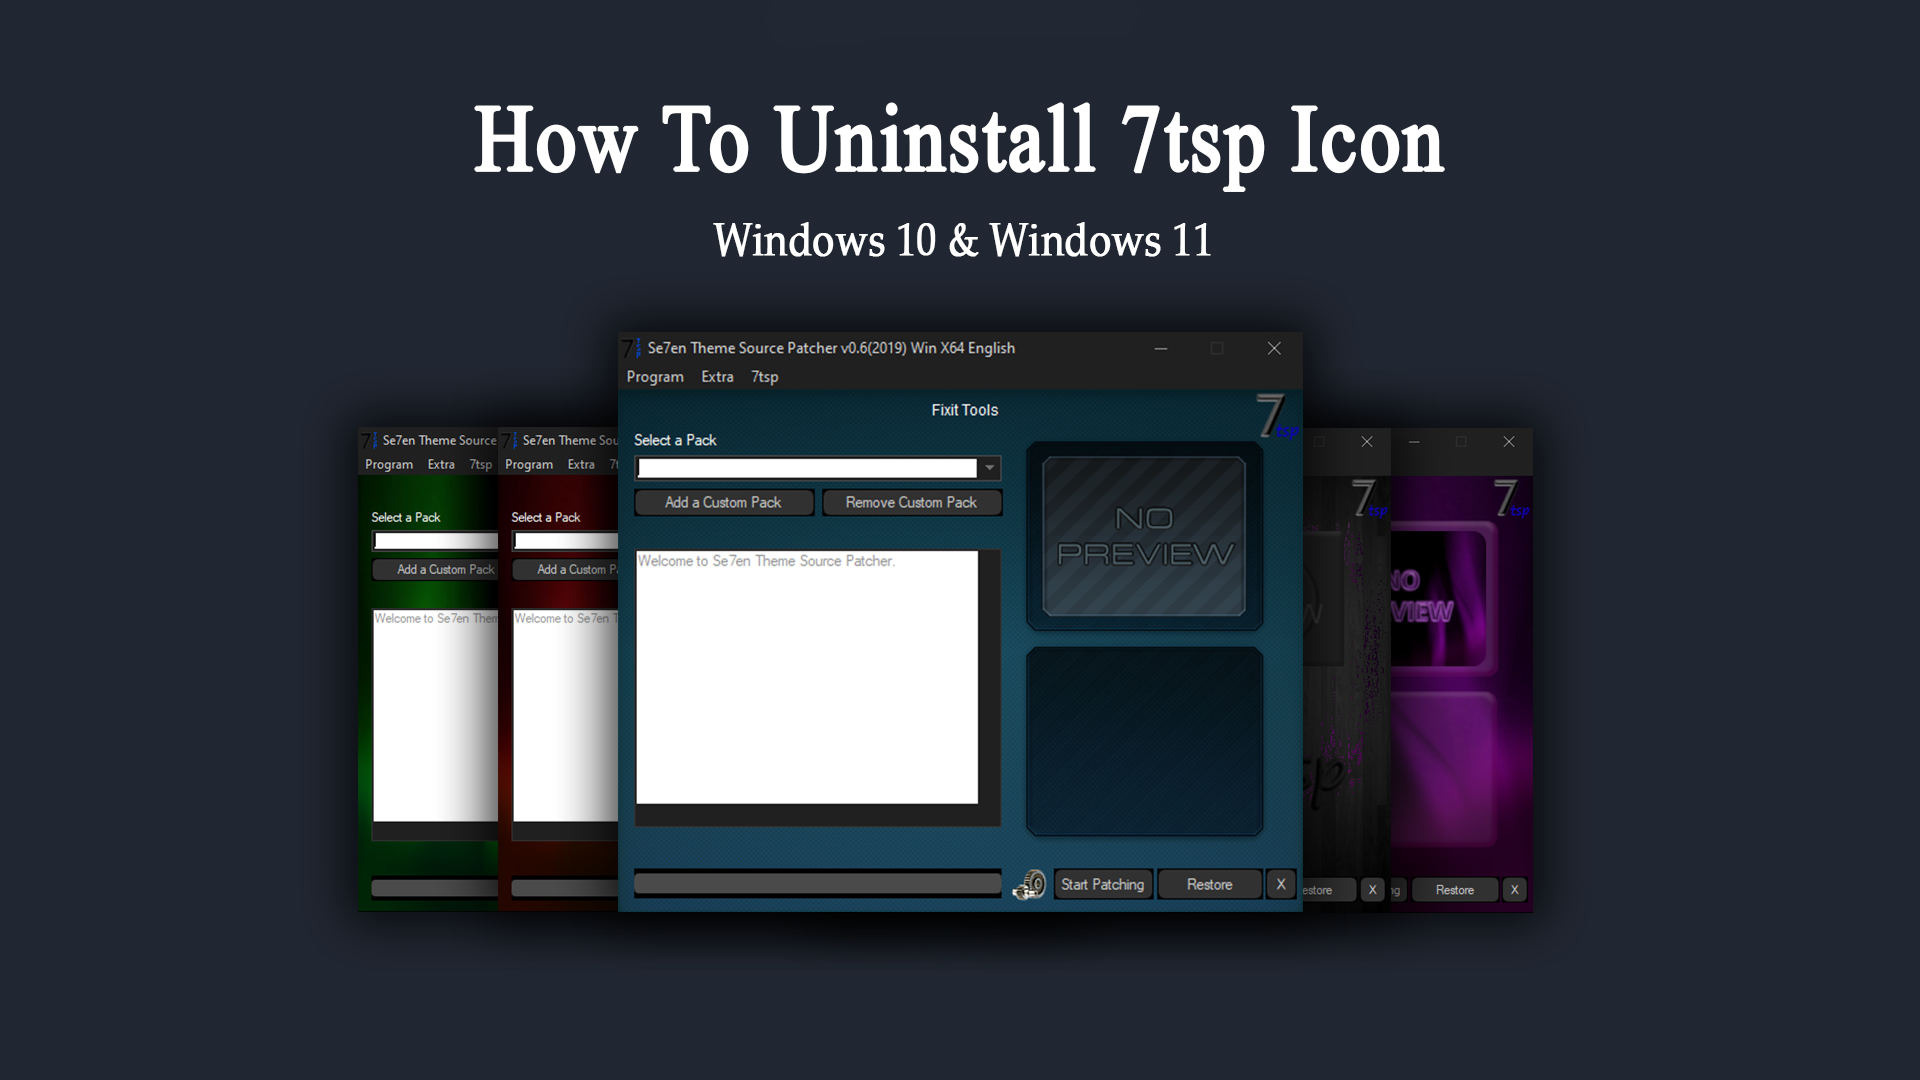 How-to-Uninstall-7tsp-GUI-icon-pack-in-windows-10-&-windows-11